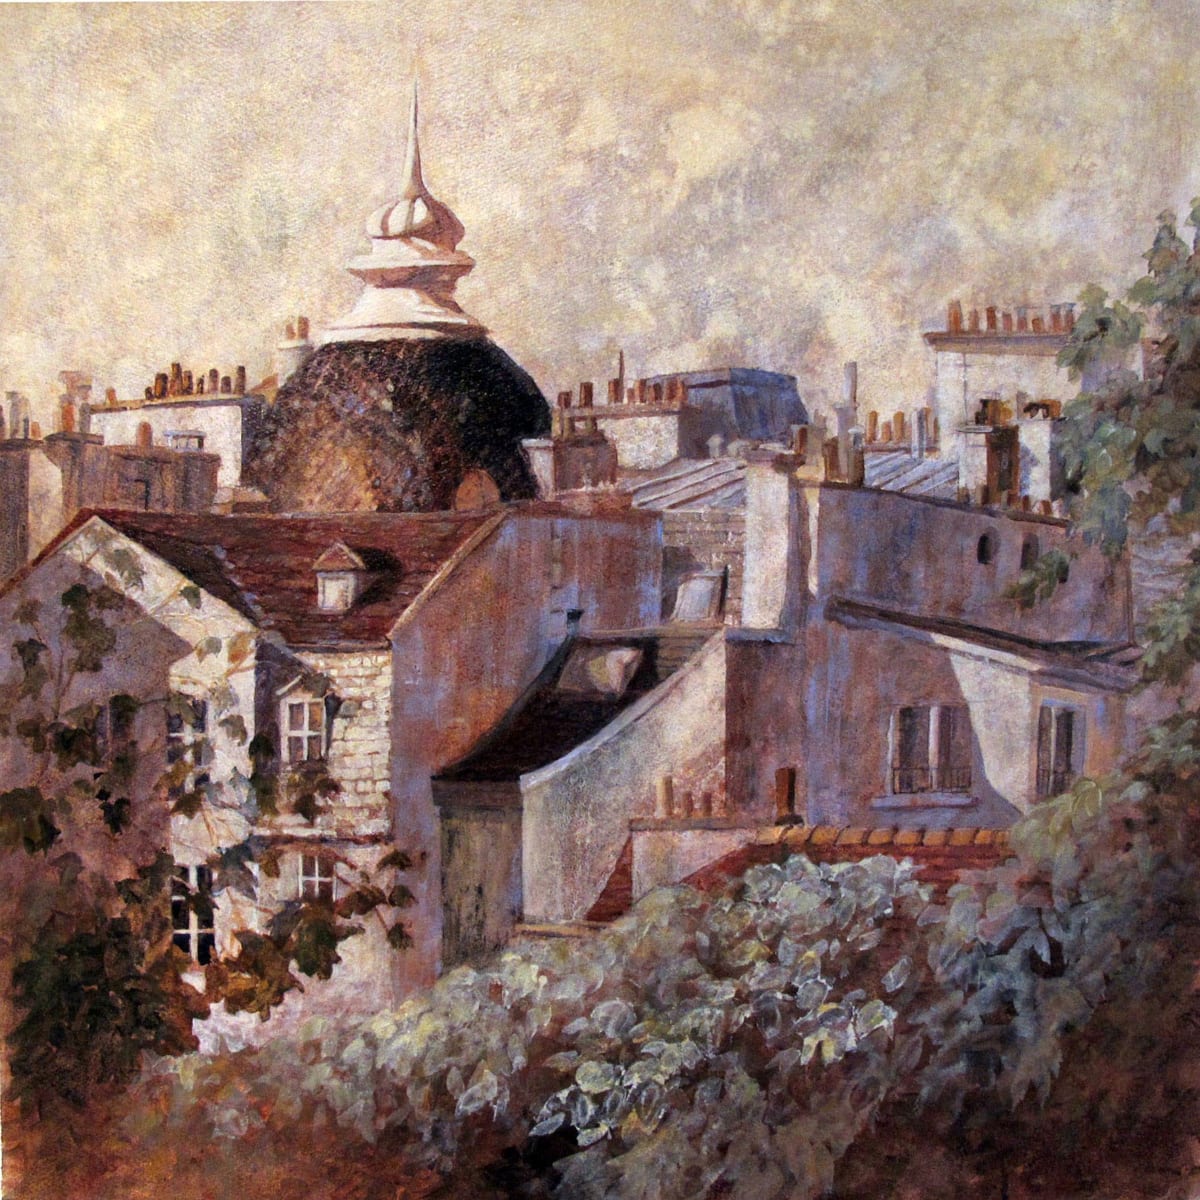 Paris Dome Amongst the Chimneys by Jann Lawrence Pollard  Image: Paris Dome Amongst the Chimneys